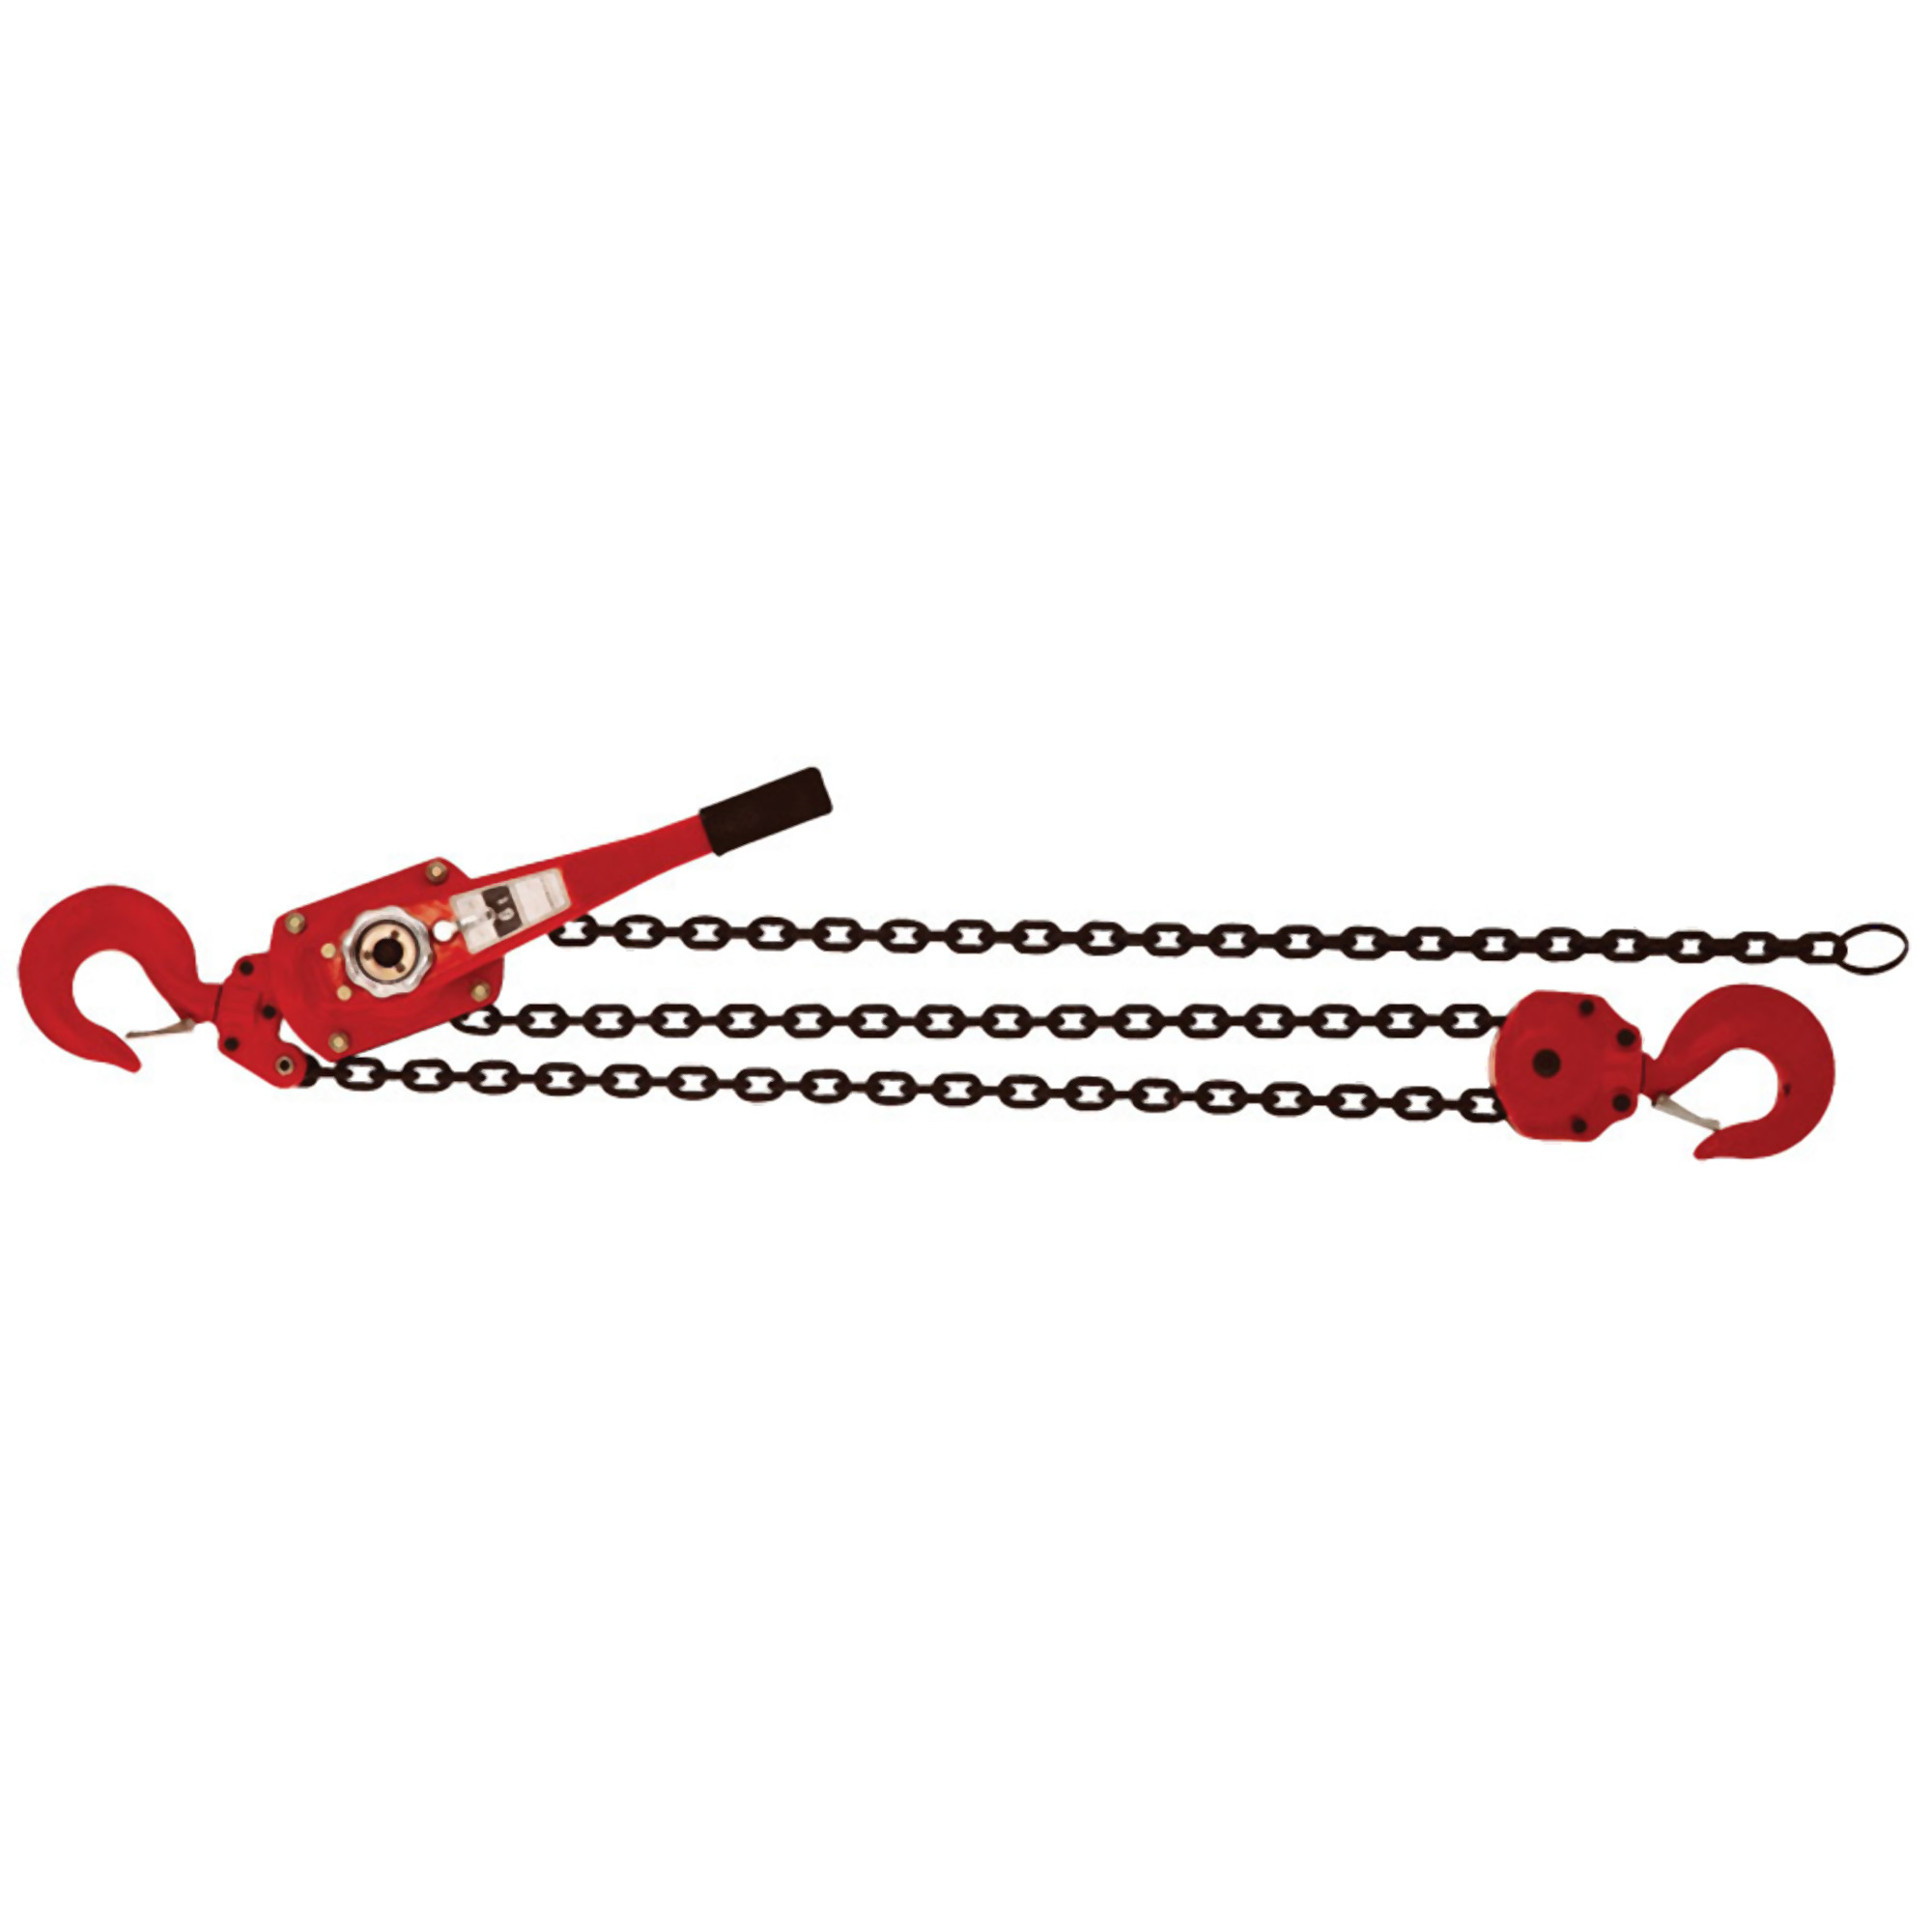 American Power Pull, 6 ton chain puller w/ 15ft. lift, Power Source Manual Lever, Capacity 12000 lb, Lift Height 15 ft, Model 660-15